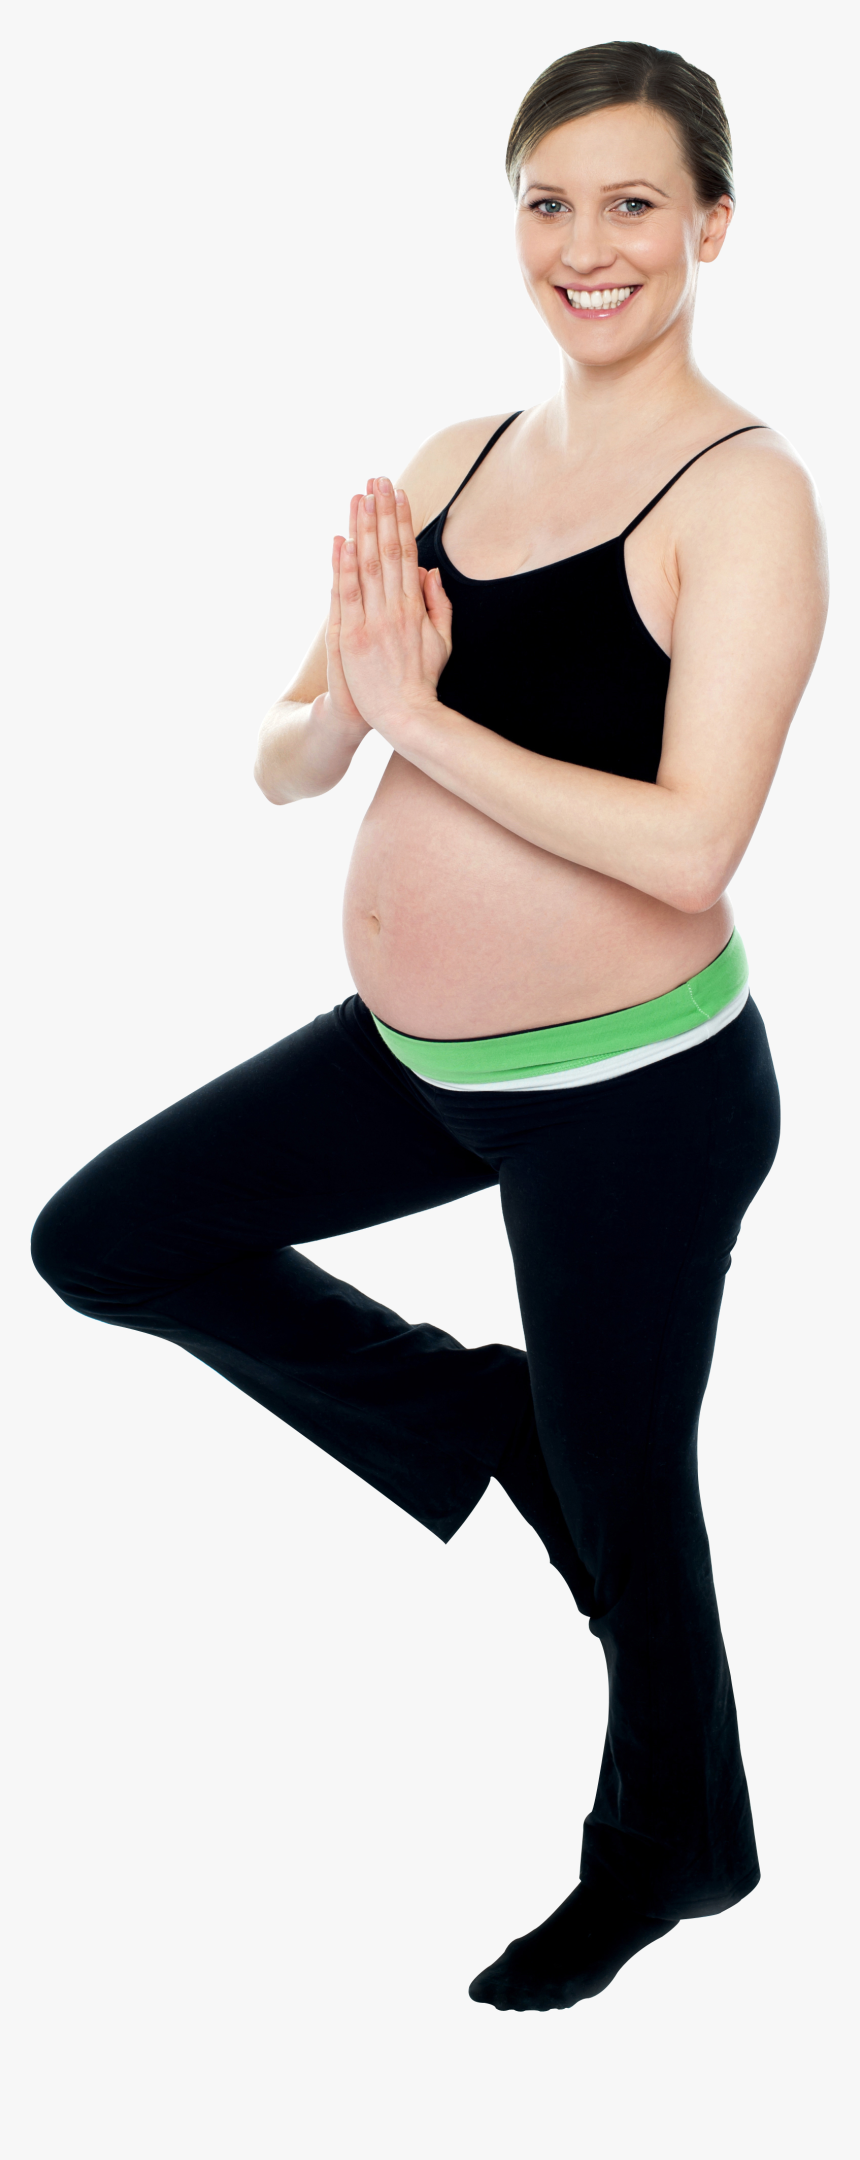 Pregnant Woman Exercise Png Image - Pregnancy, Transparent Png, Free Download